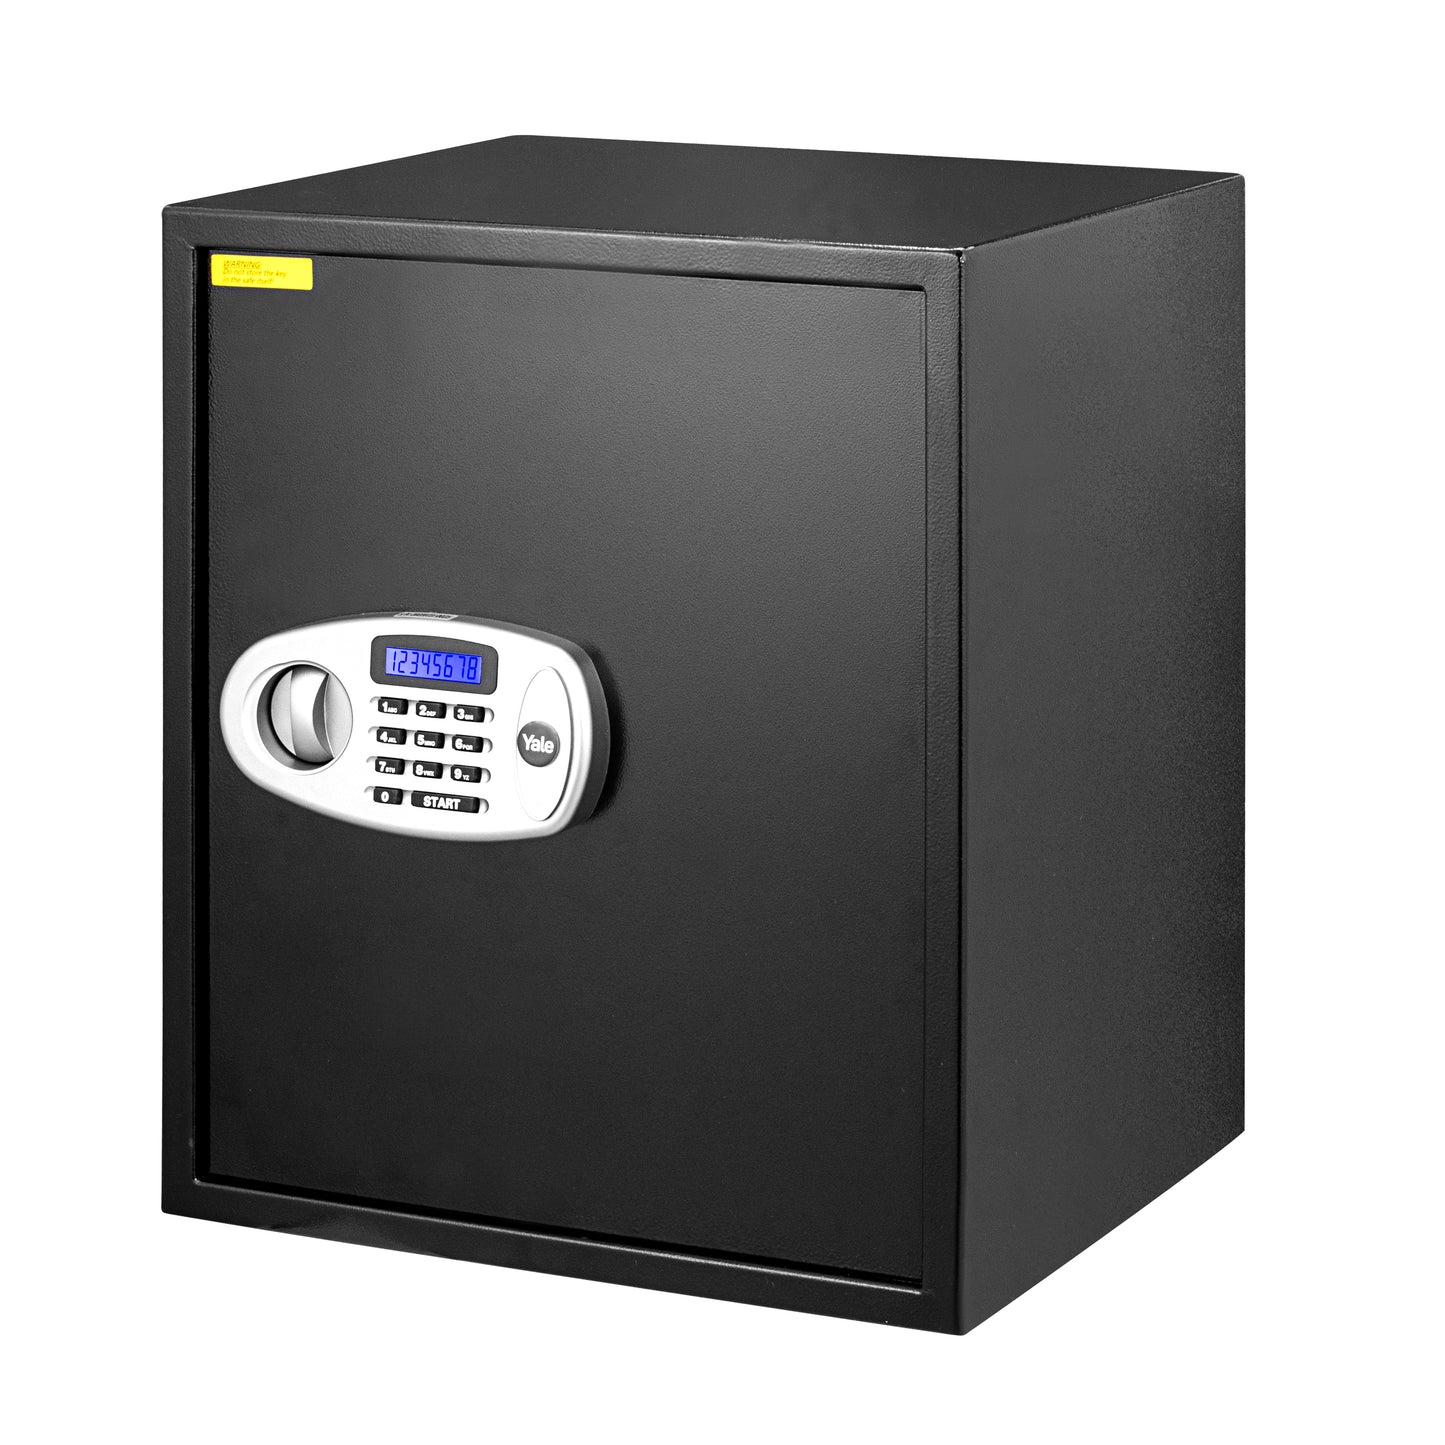 Yale Standard Professional X-Large Electronic Safe locker with Pincode Access- 59 litres, Black